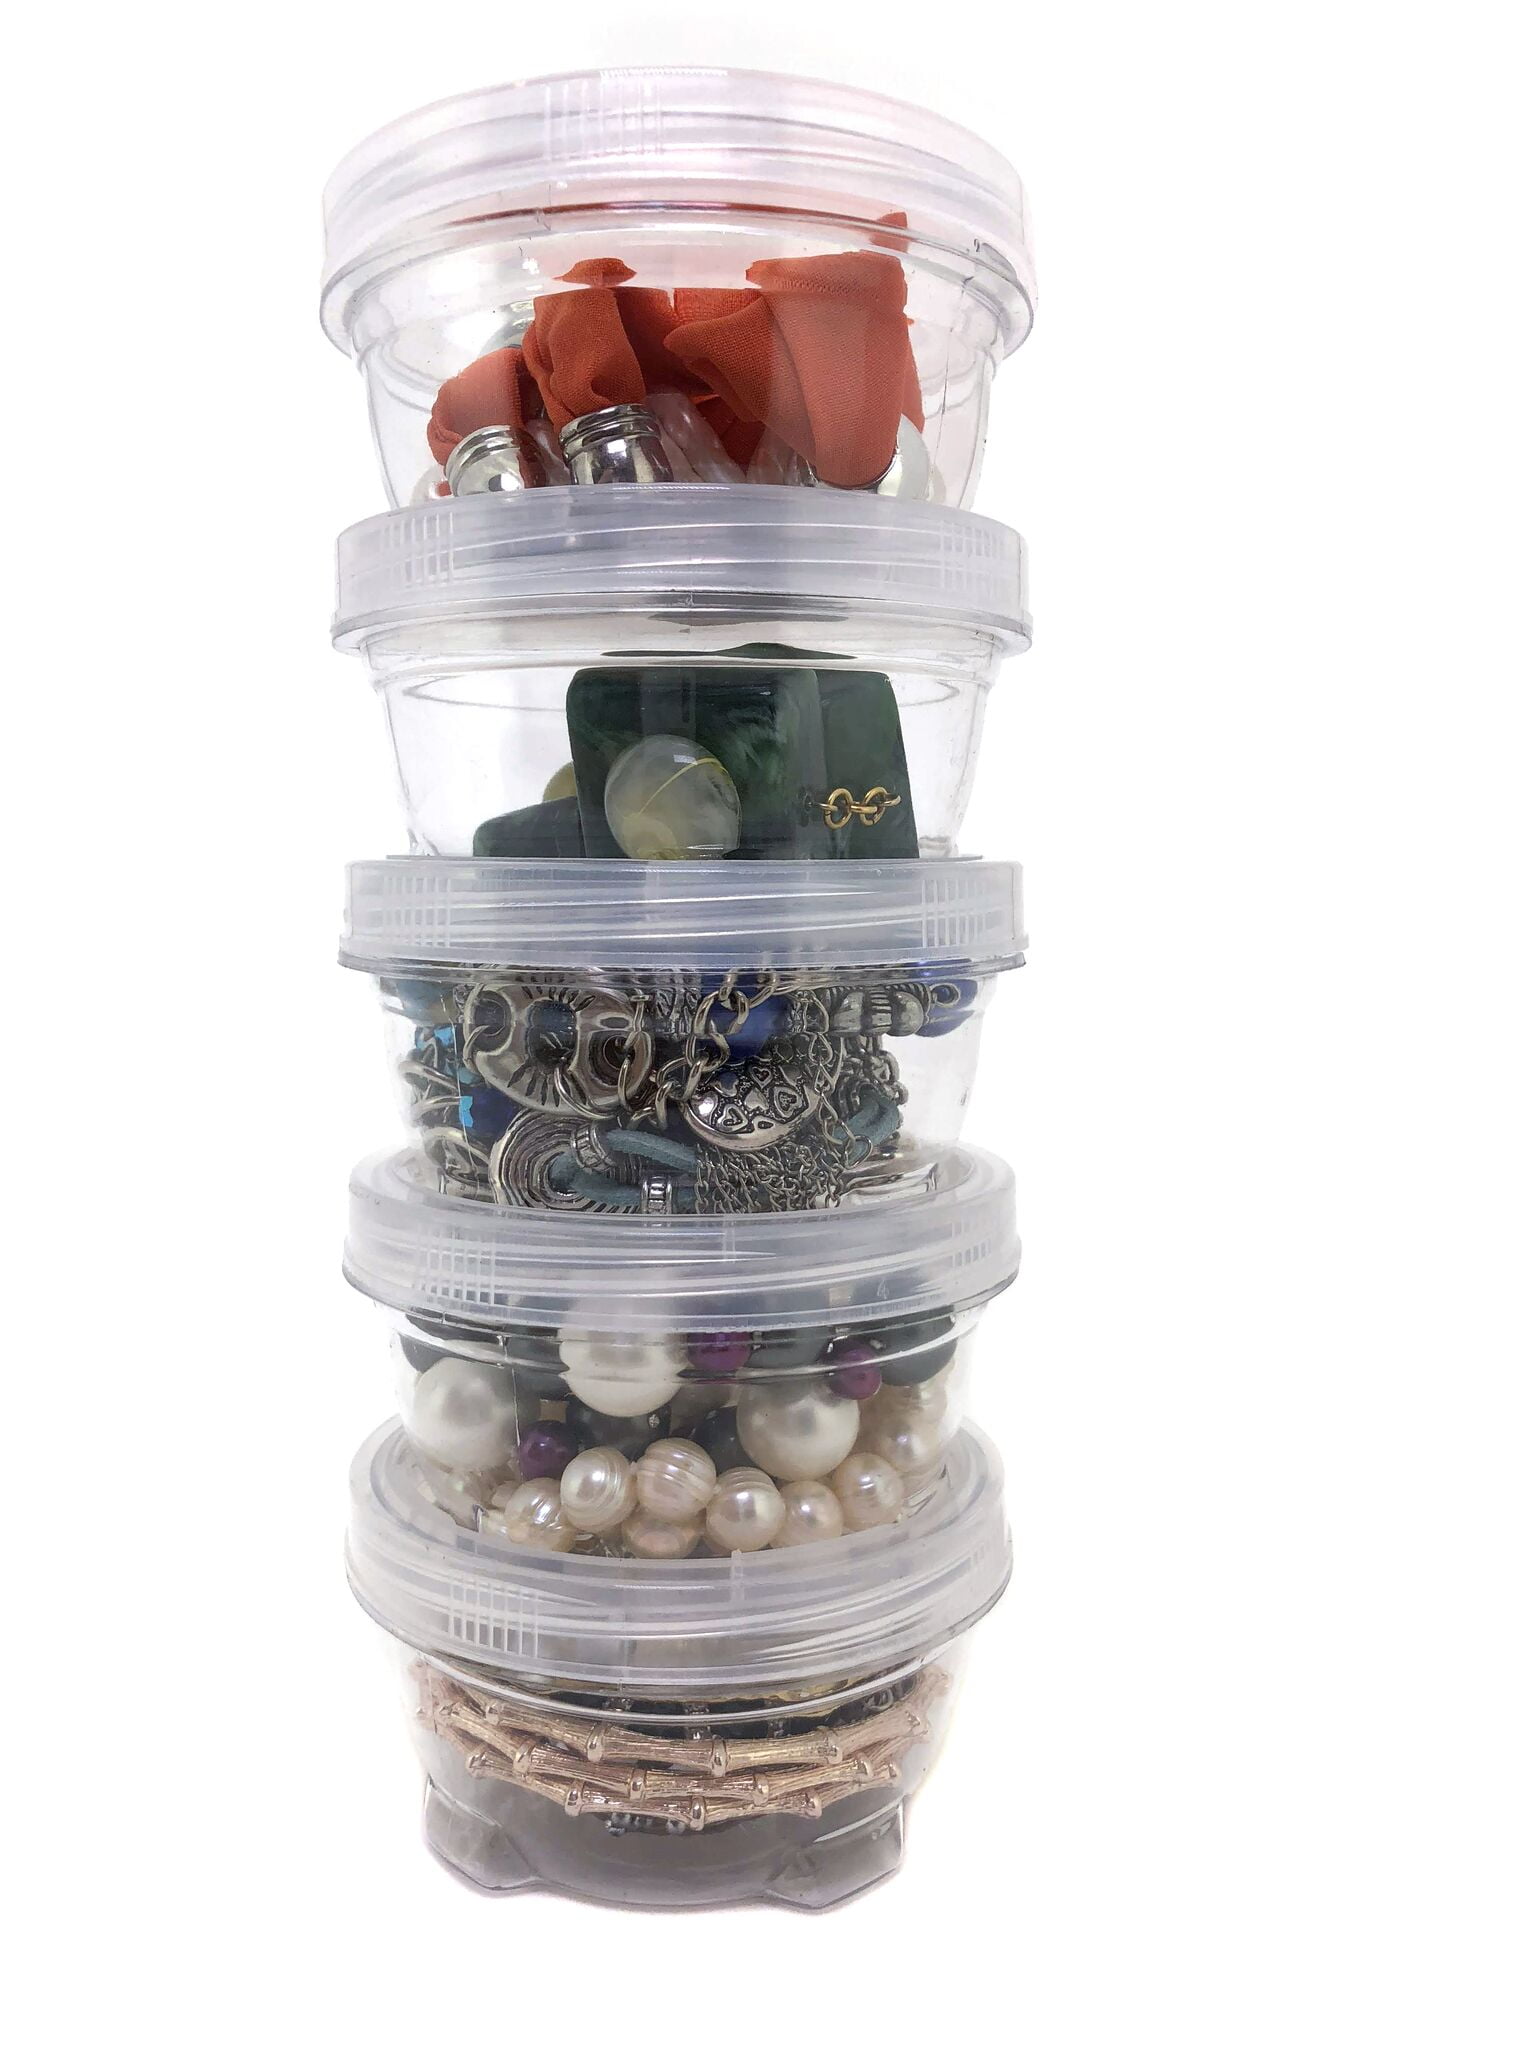 Storage Container Impact Resistant Stackable Clear Containers 6 For Beads  Crafts Findings Small Items 1.75 Round - Watch Material